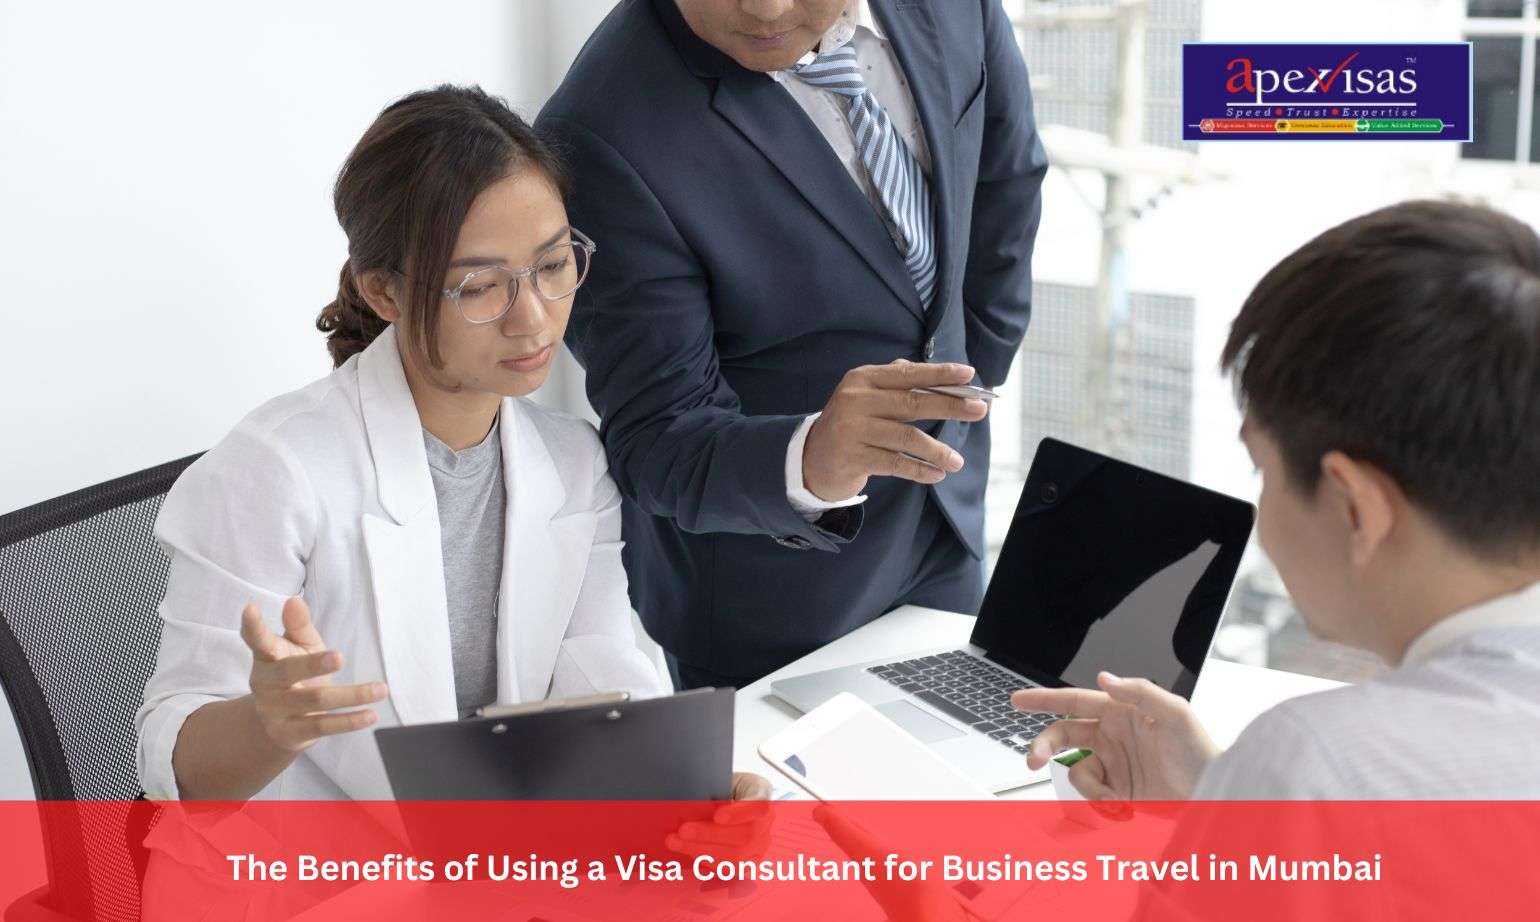 The Benefits of Using a Visa Consultant for Business Travel in Mumbai